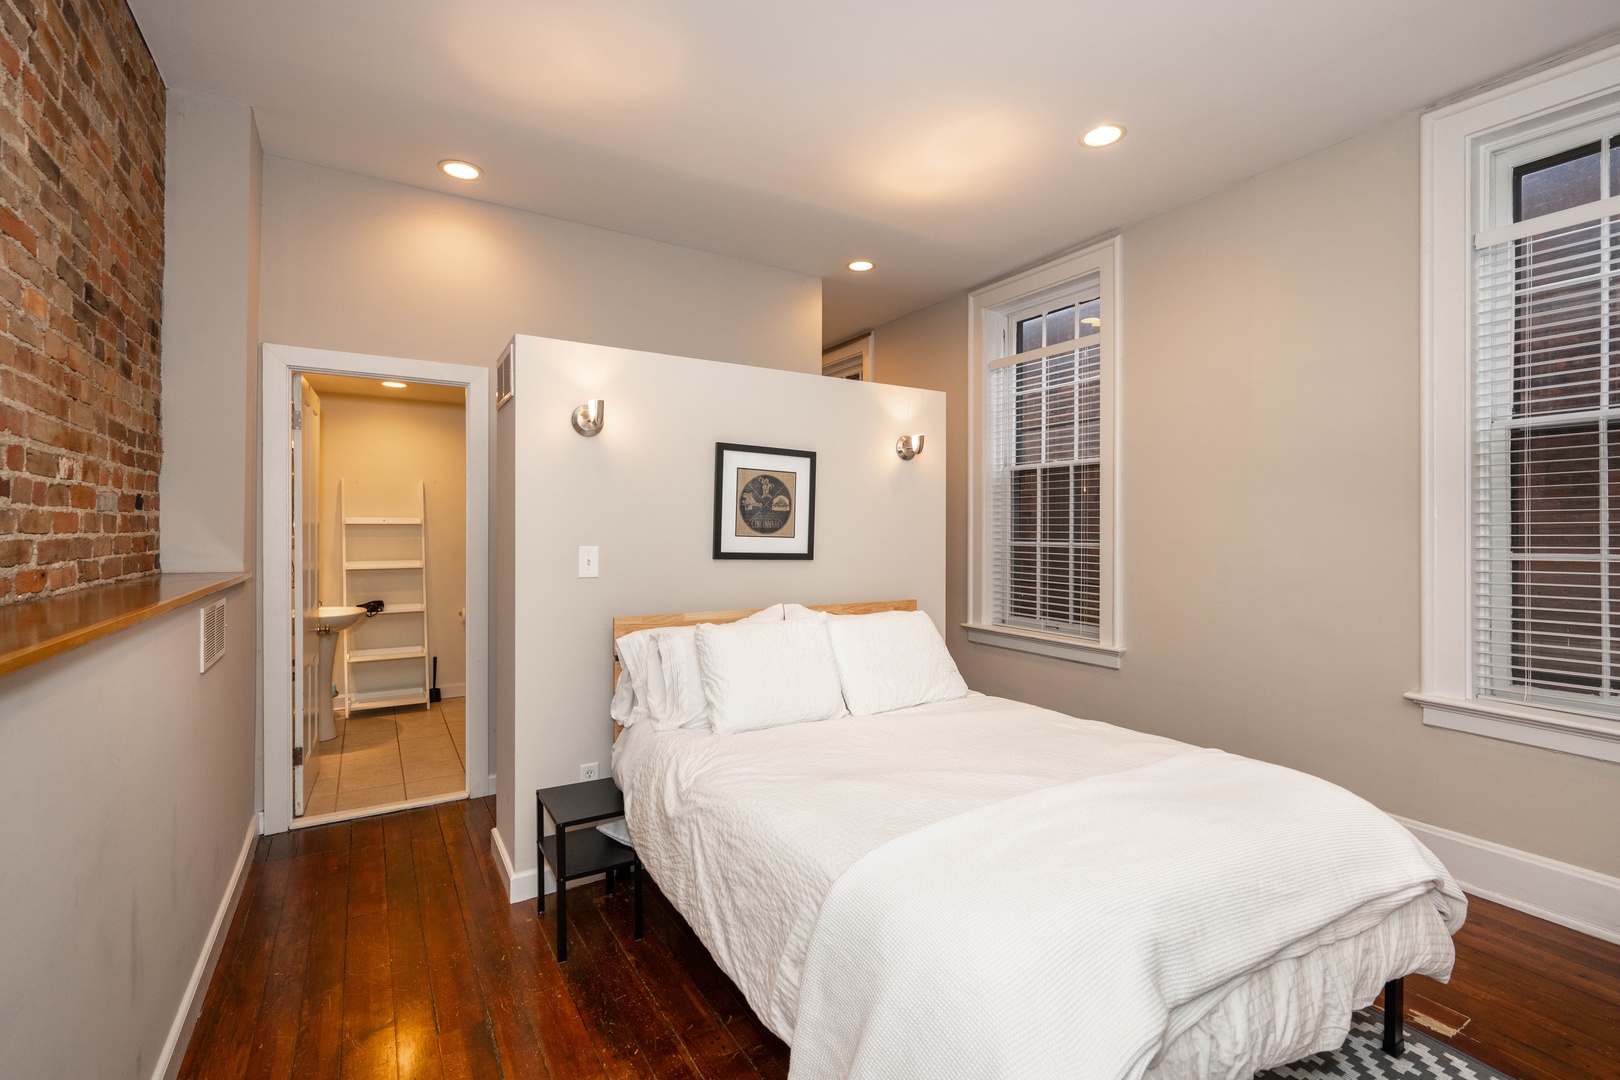 The loft sleeping area boasts a plush queen bed, ensuite, & laundry access